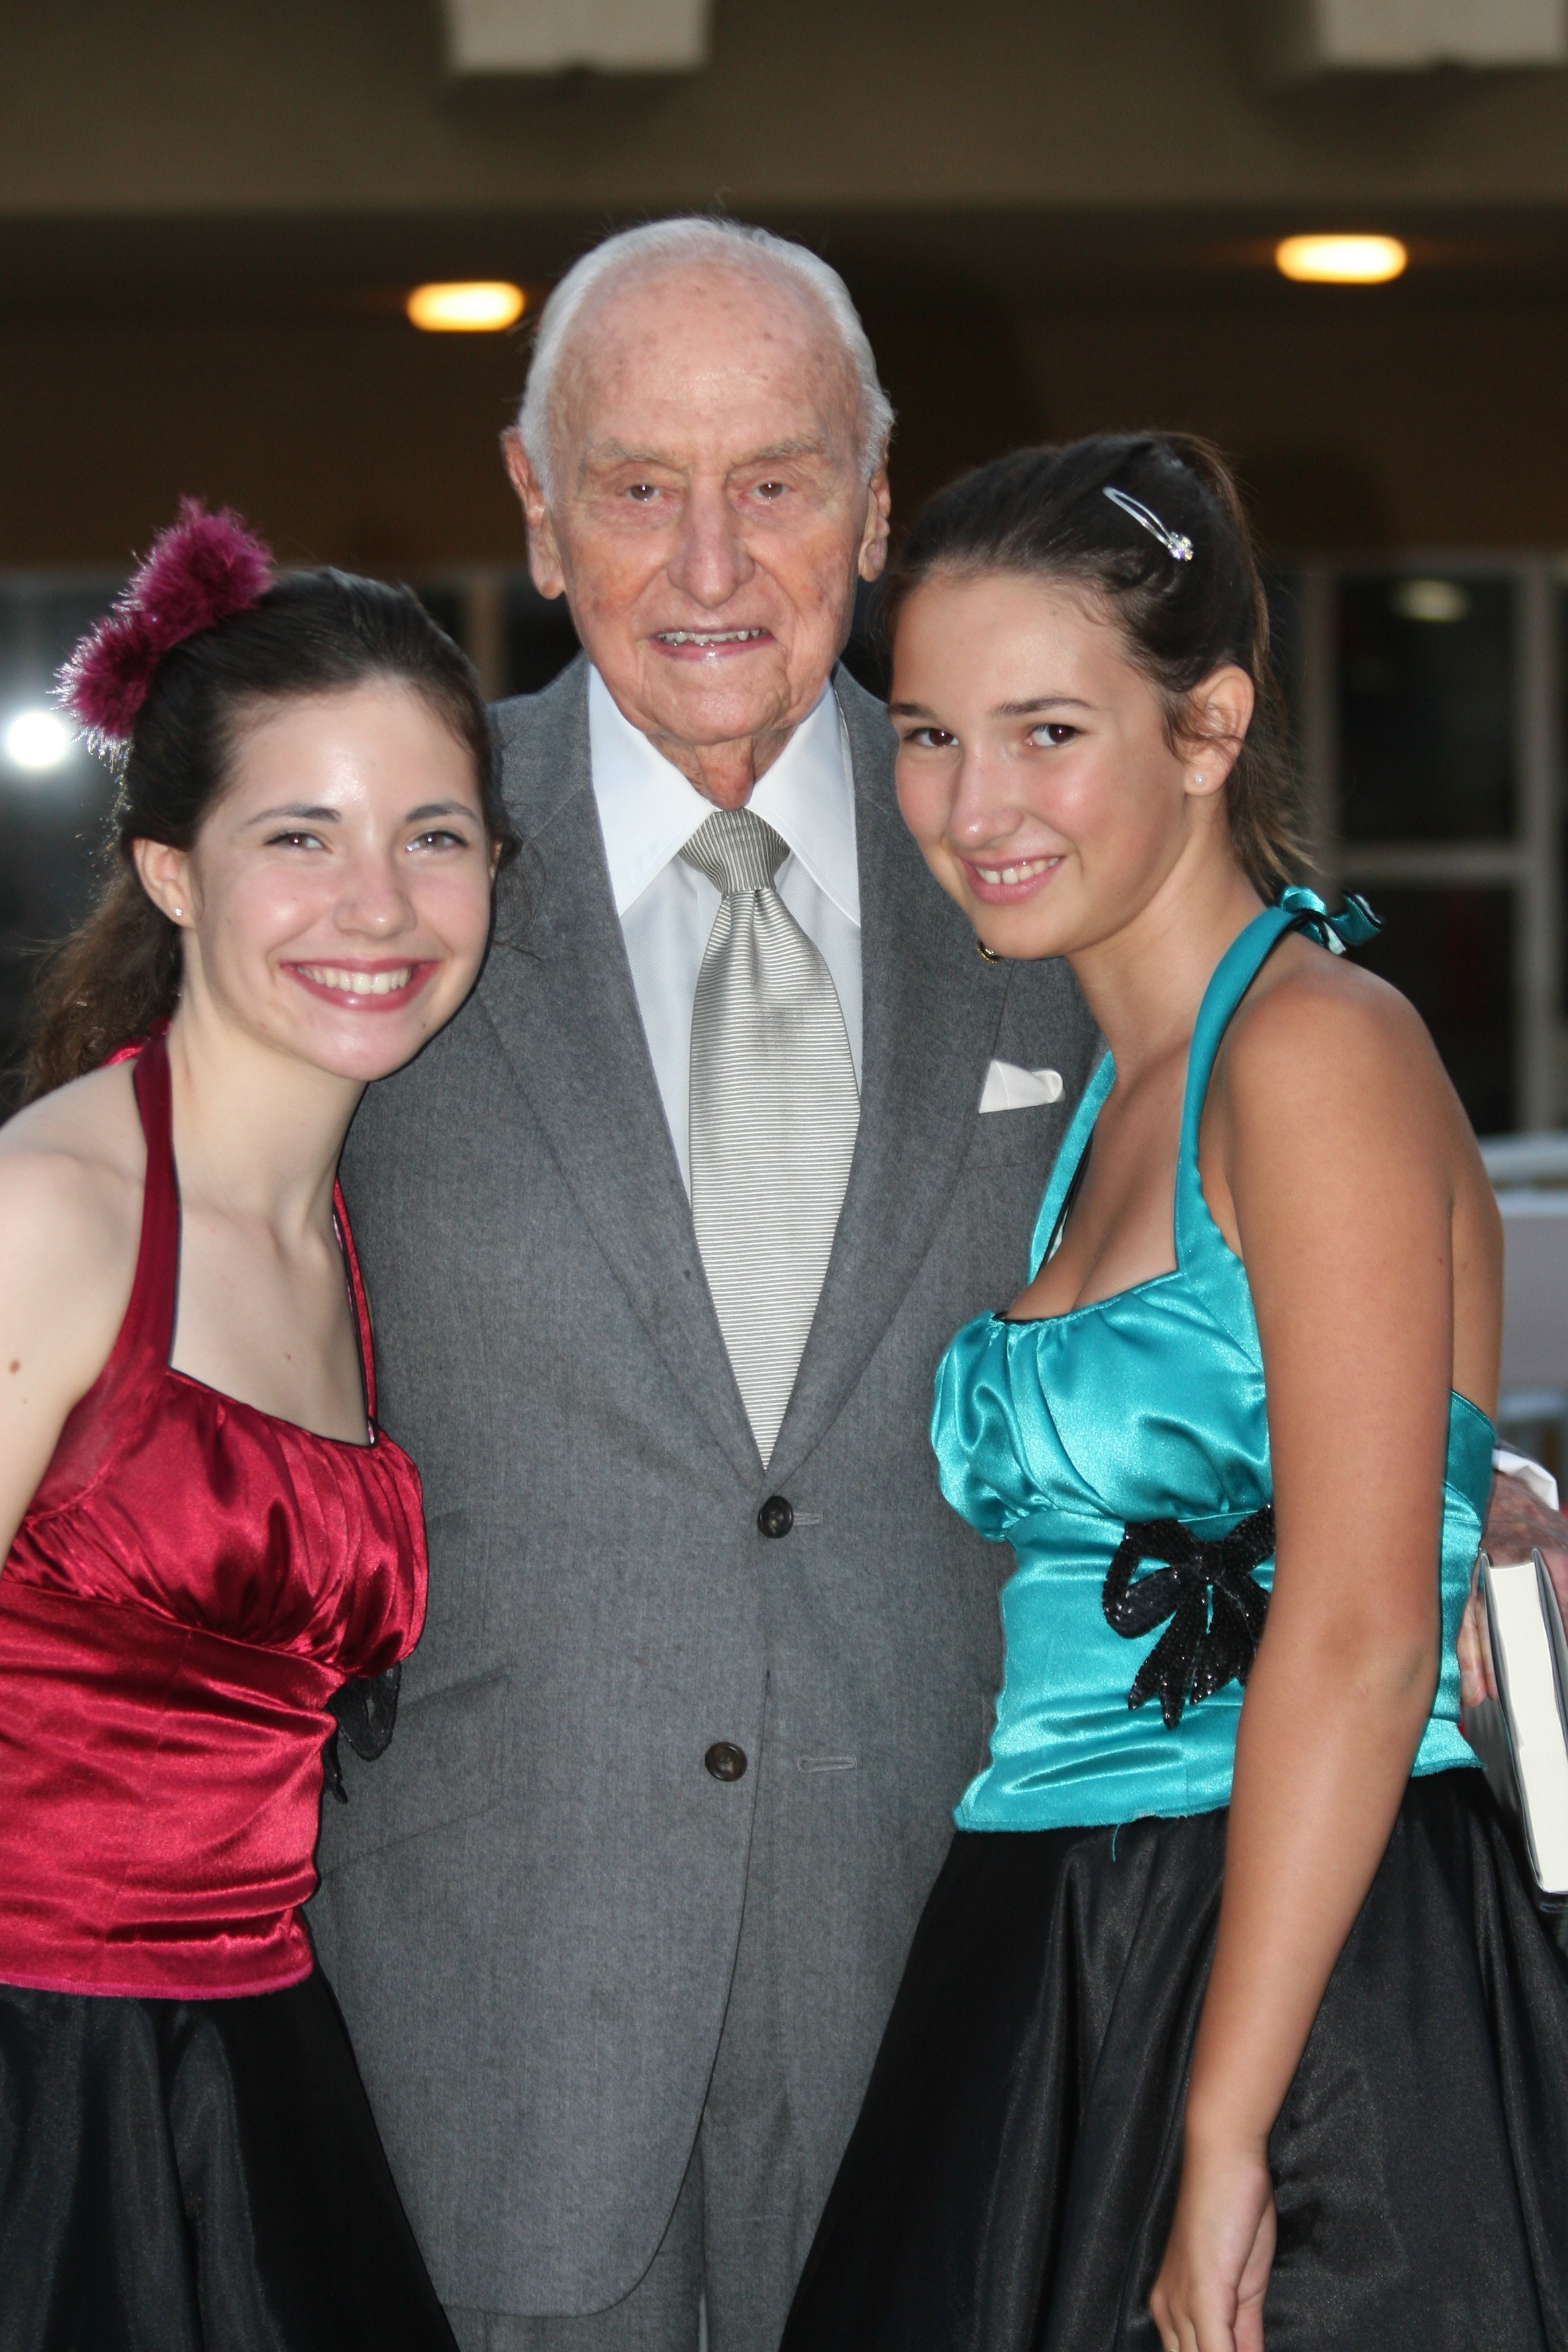 NicoleSmolen, Lucy Angelo with AC Lyles at the NY Annual Alumni